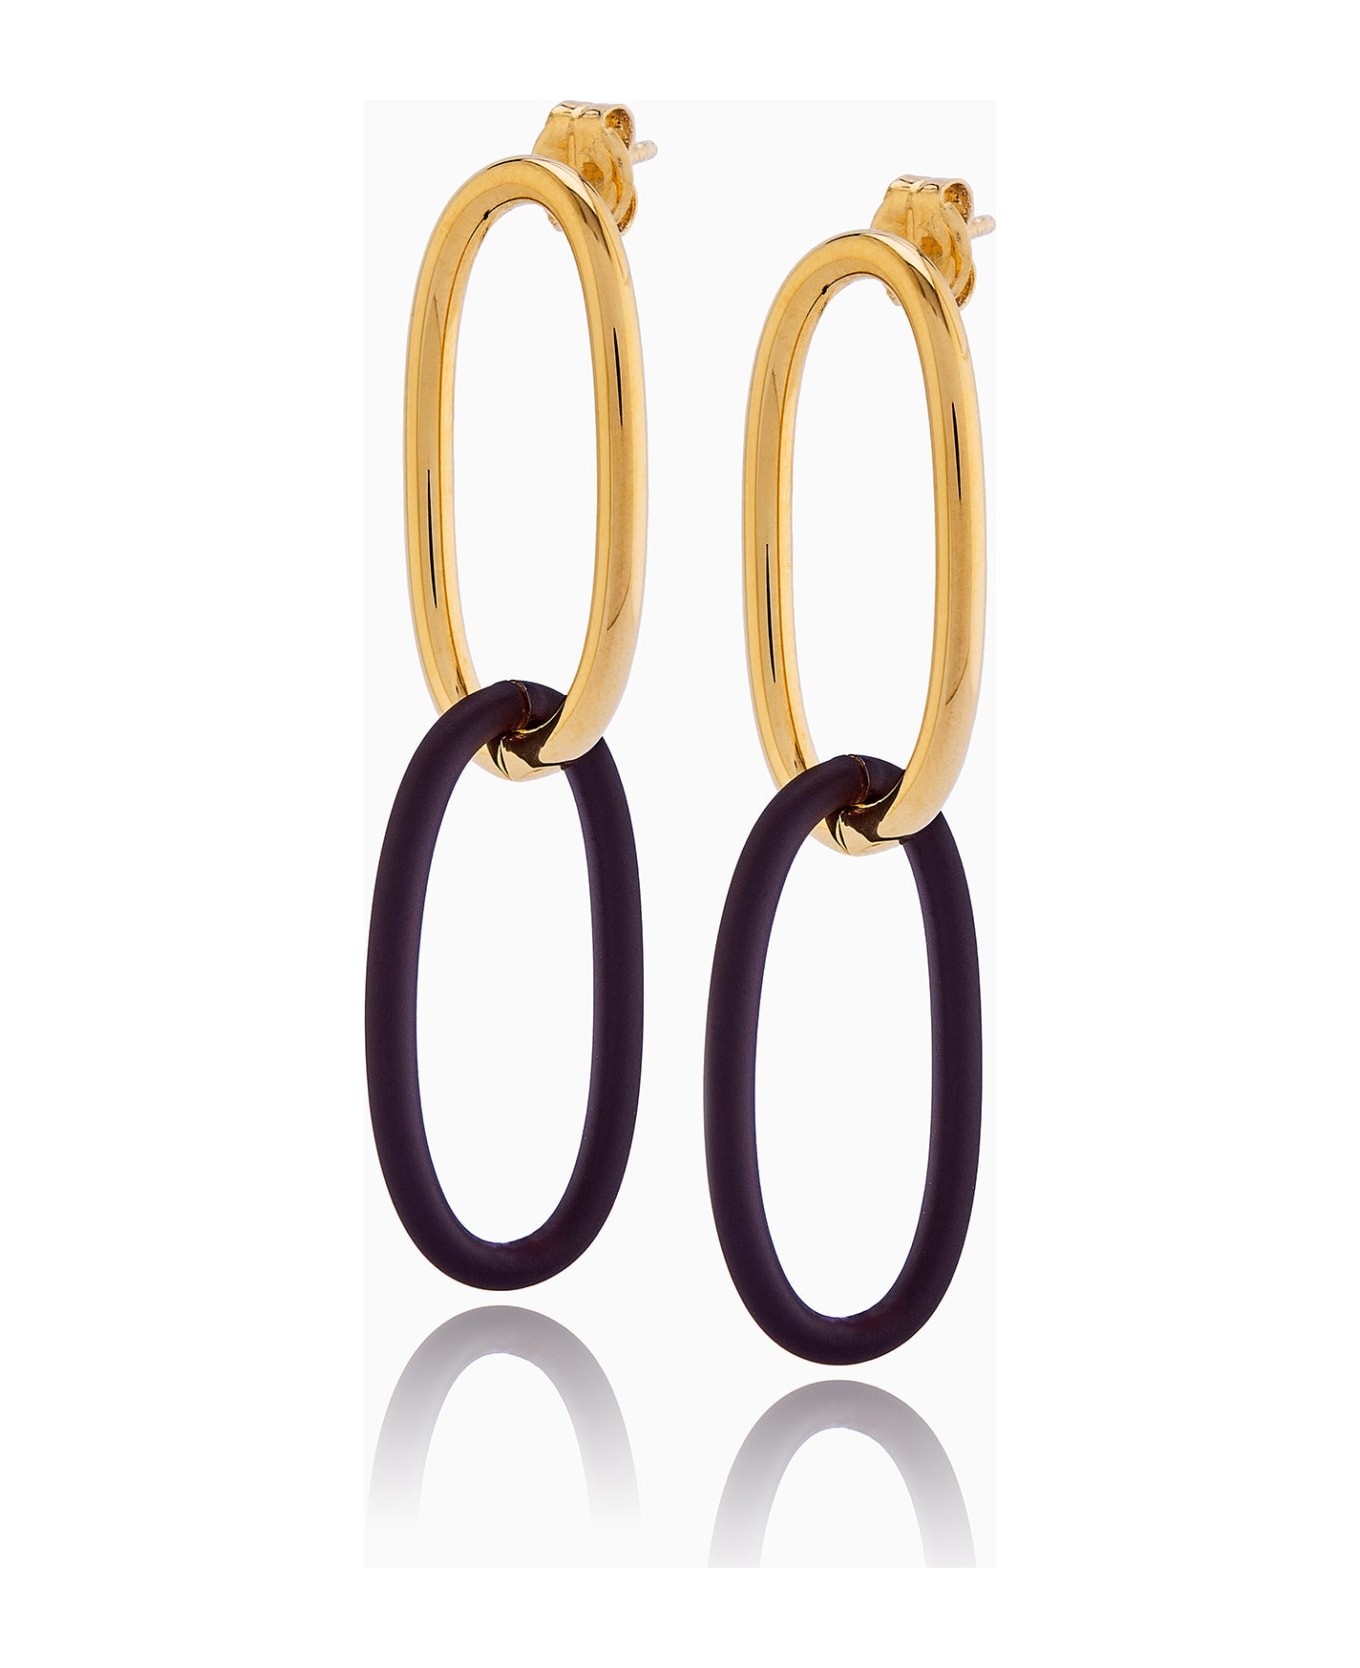 Federica Tosi Earring Bolt Gold Brown - GOLD -BROWN